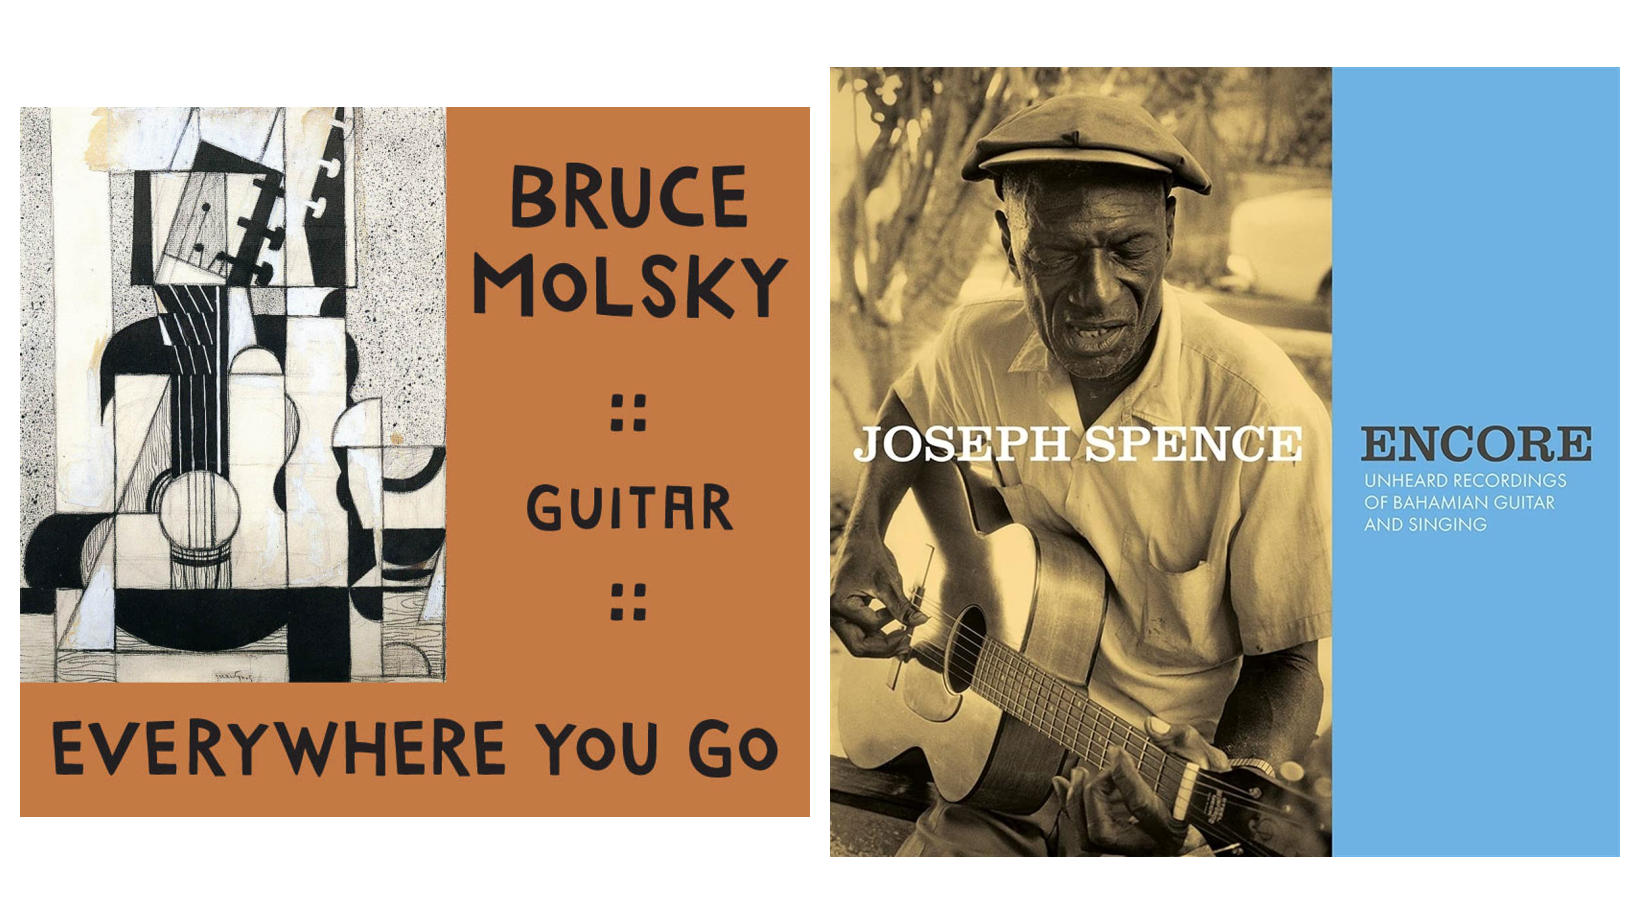 Two album covers: Left is Bruce Molsky's Everywhere You Go, which is a burnt orange color with a cubist guitar-like design to the left. To the right is Joseph Spence's Encore, which has a light blue background and has a black-and-white image of the musician playing guitar and wearing a flat cap to the left side of the album cover.